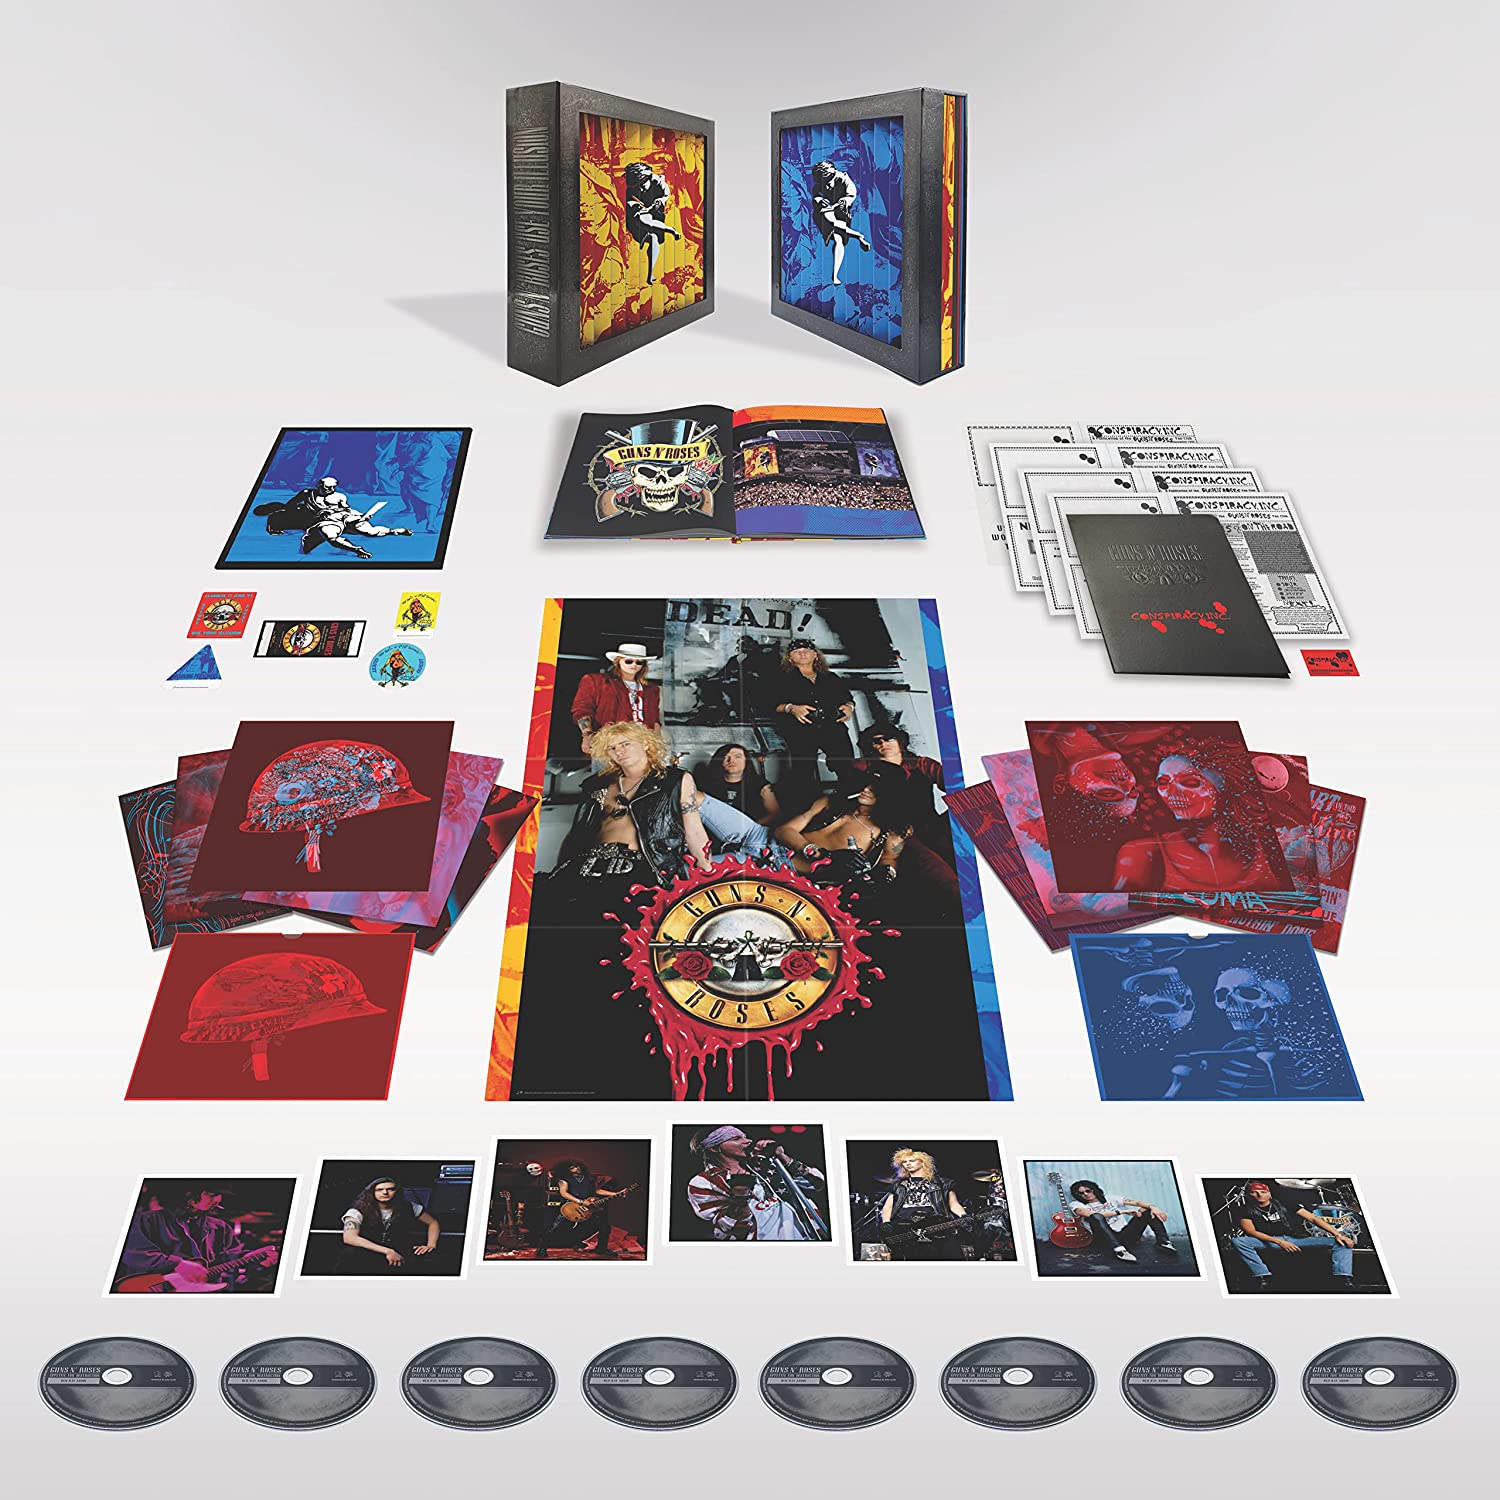 Guns N' Roses Use Your Illusion I & II Super Deluxe CD+Blu-Ray Boxset